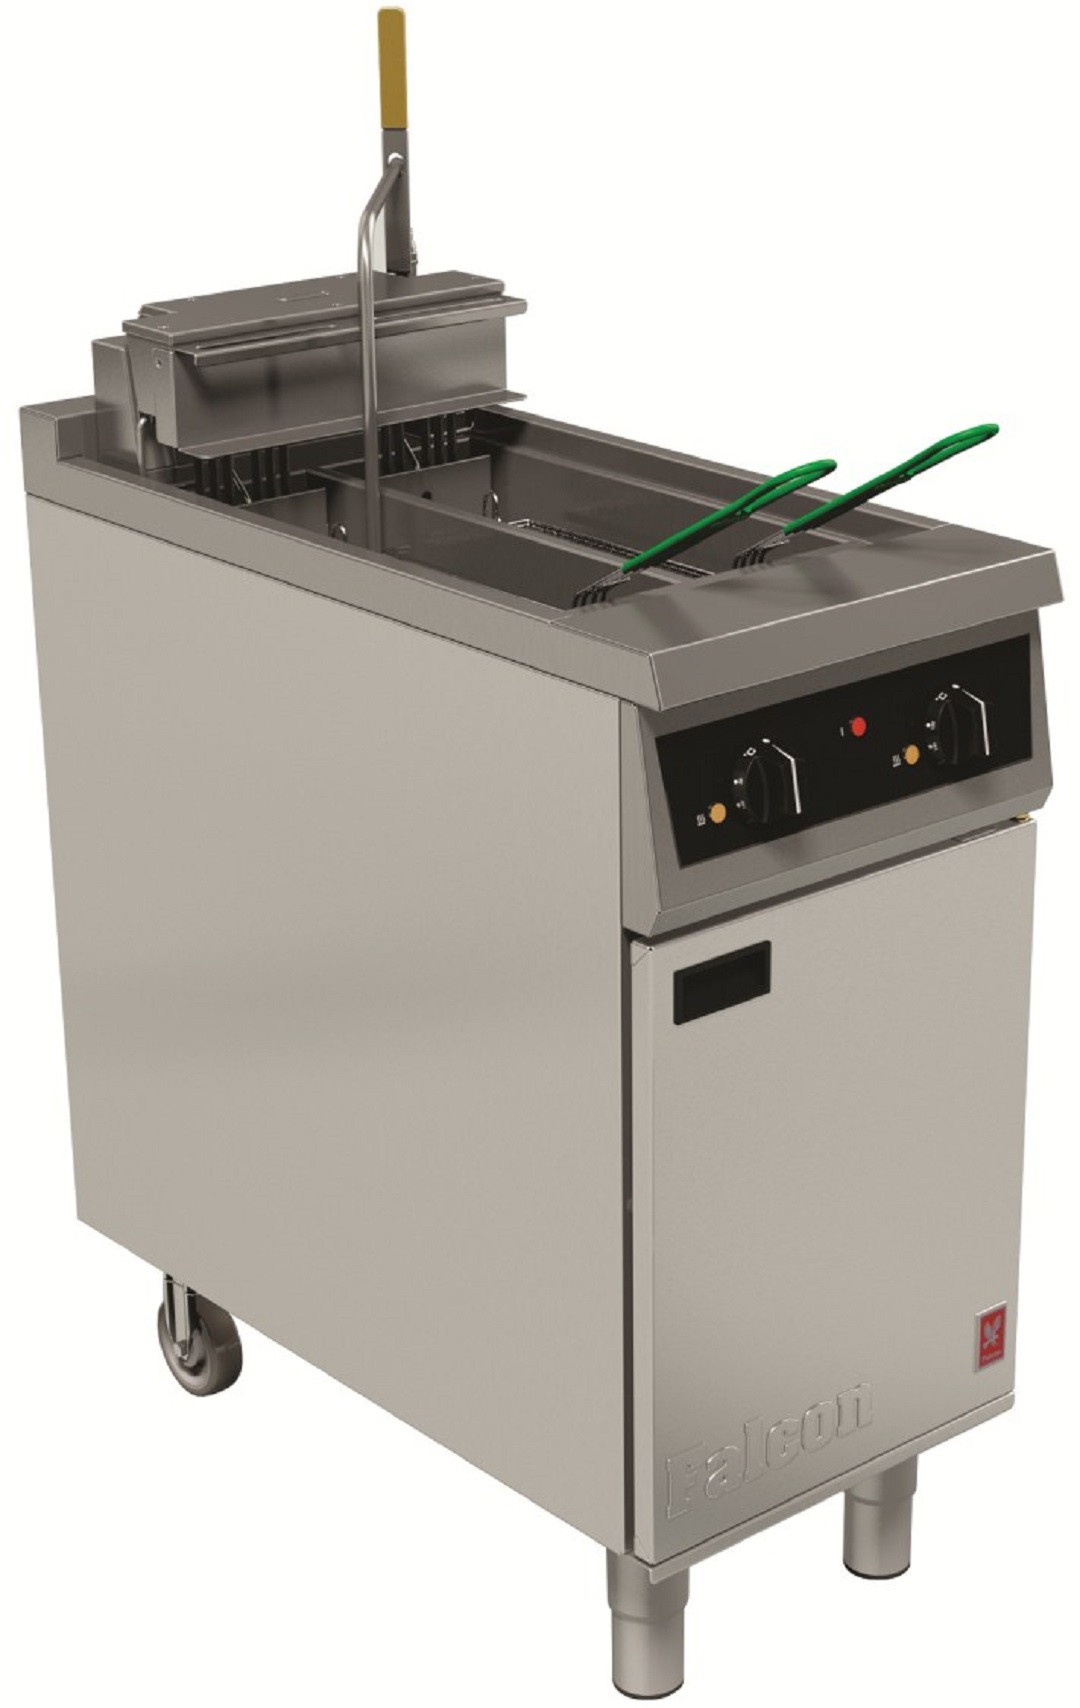 Falcon 400 Series E421F Fryer with in-built filtration